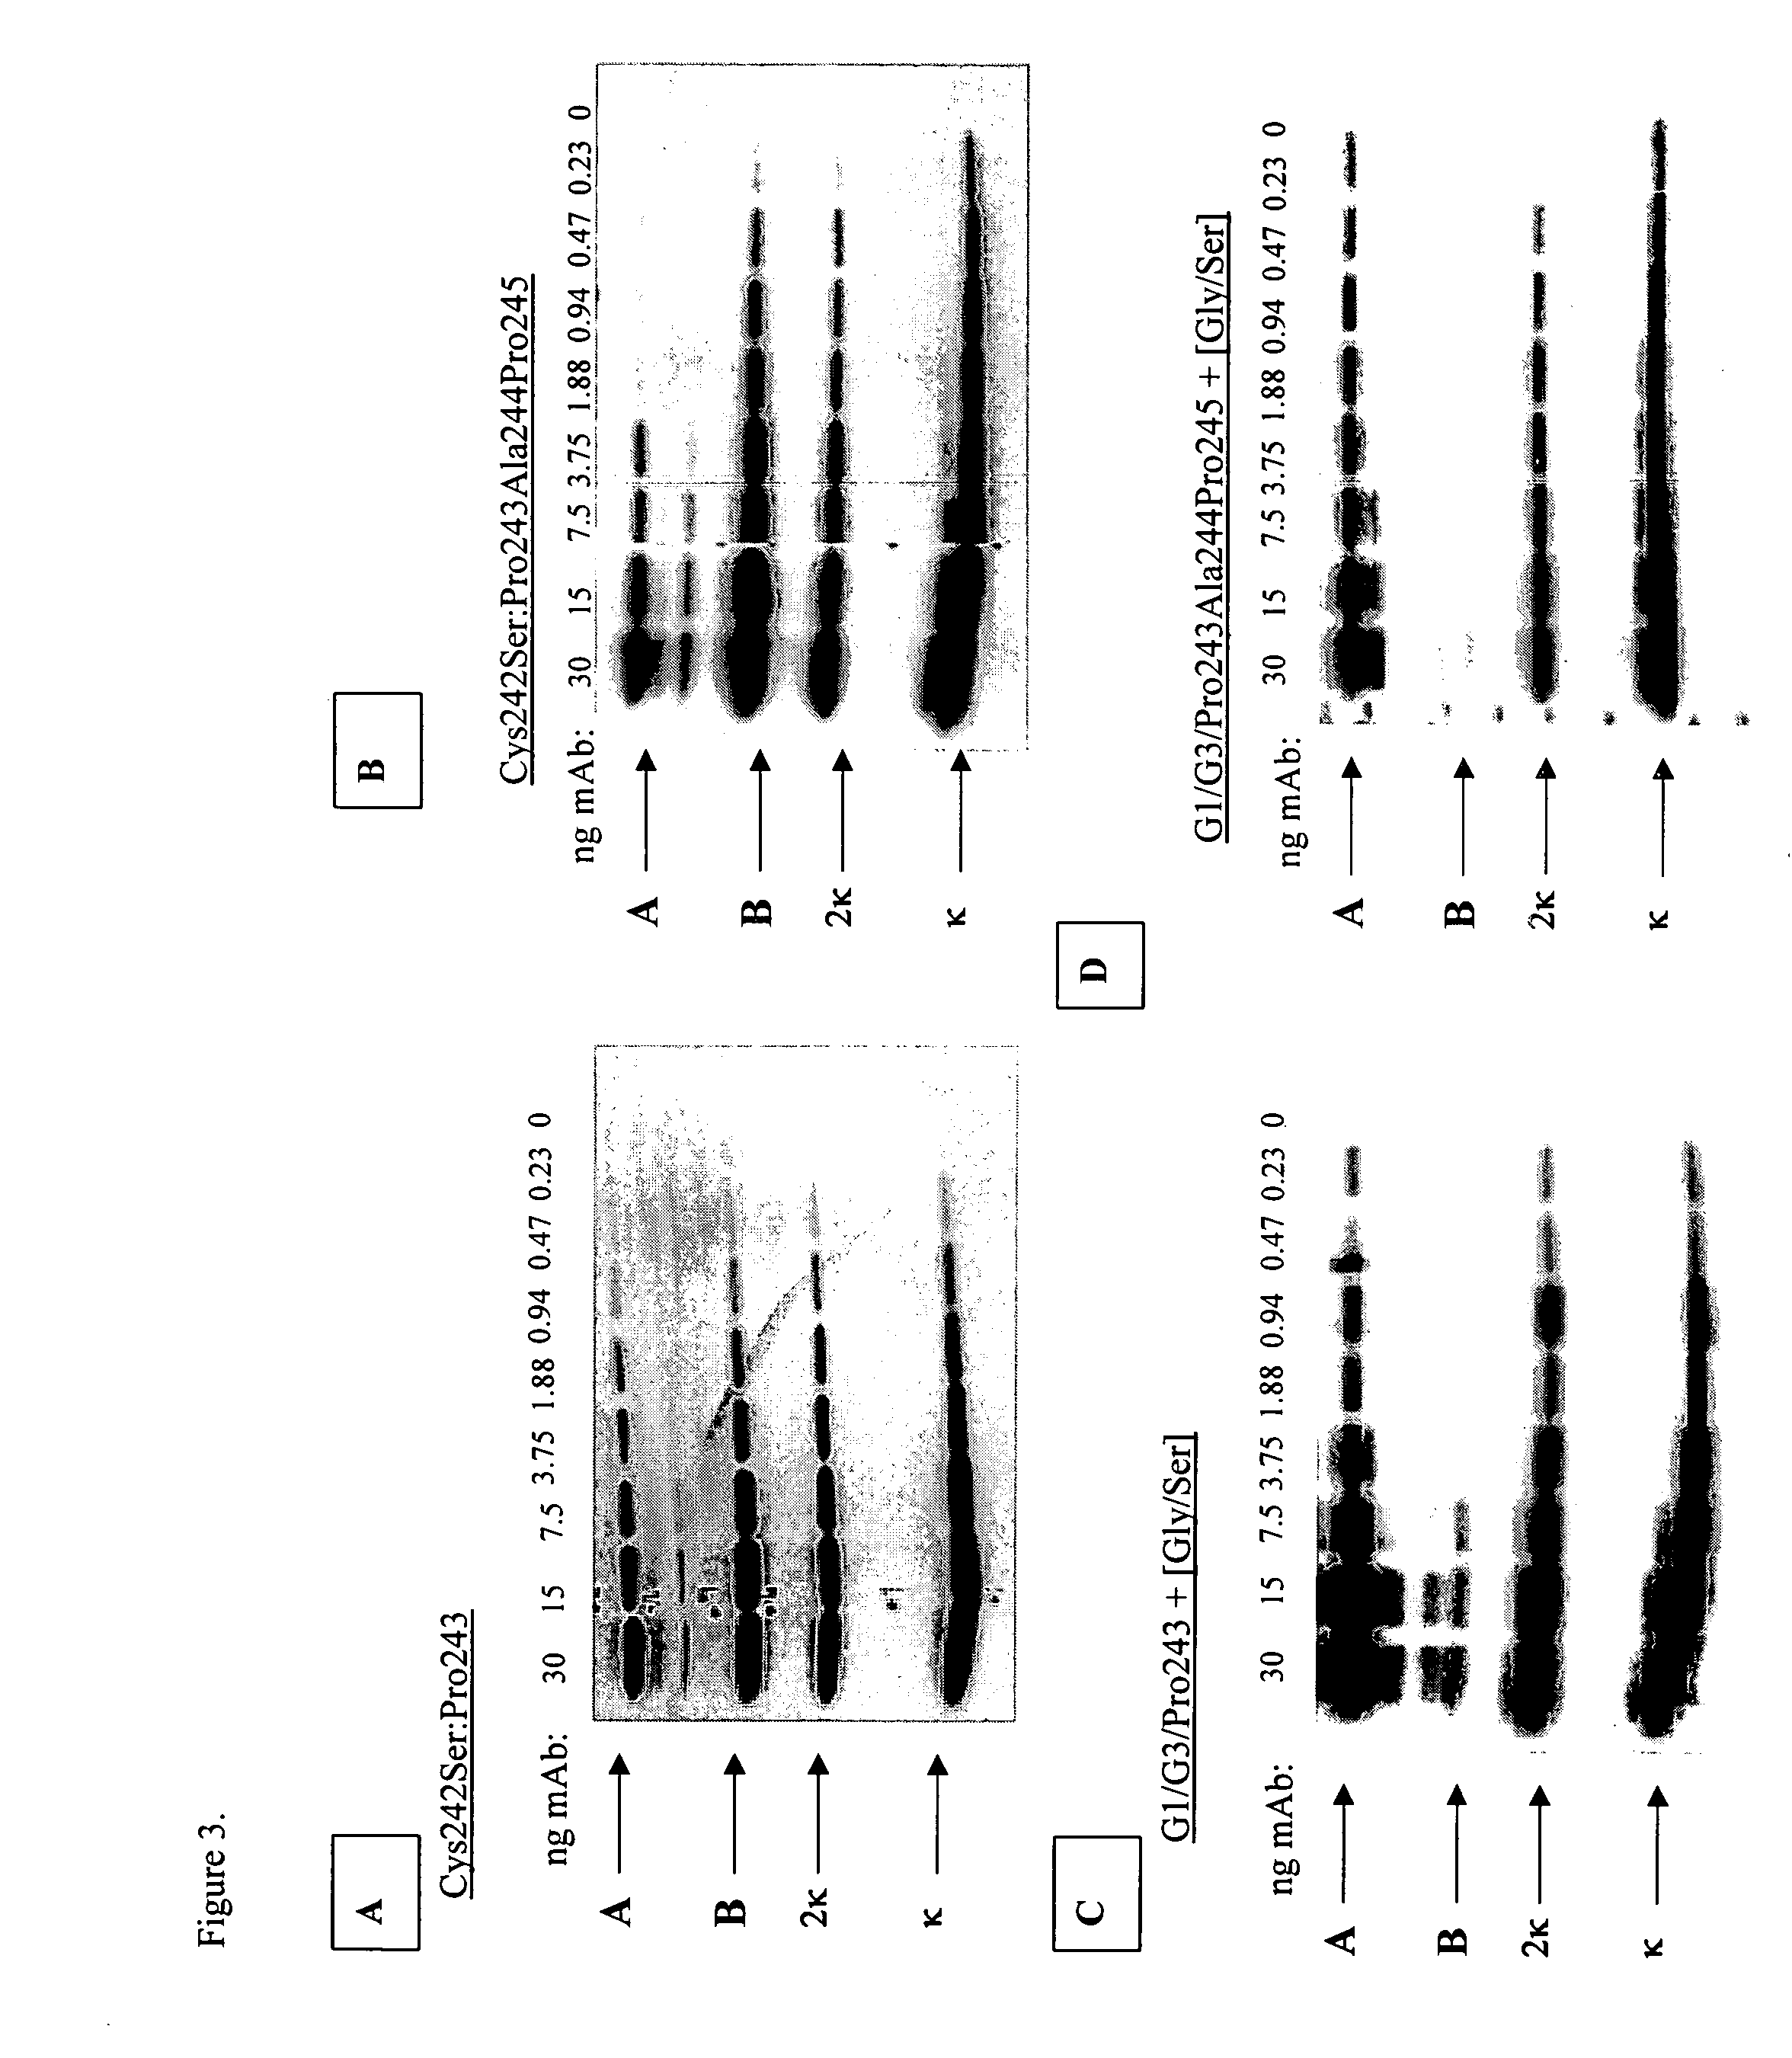 Purification and preferential synthesis of binding molecules